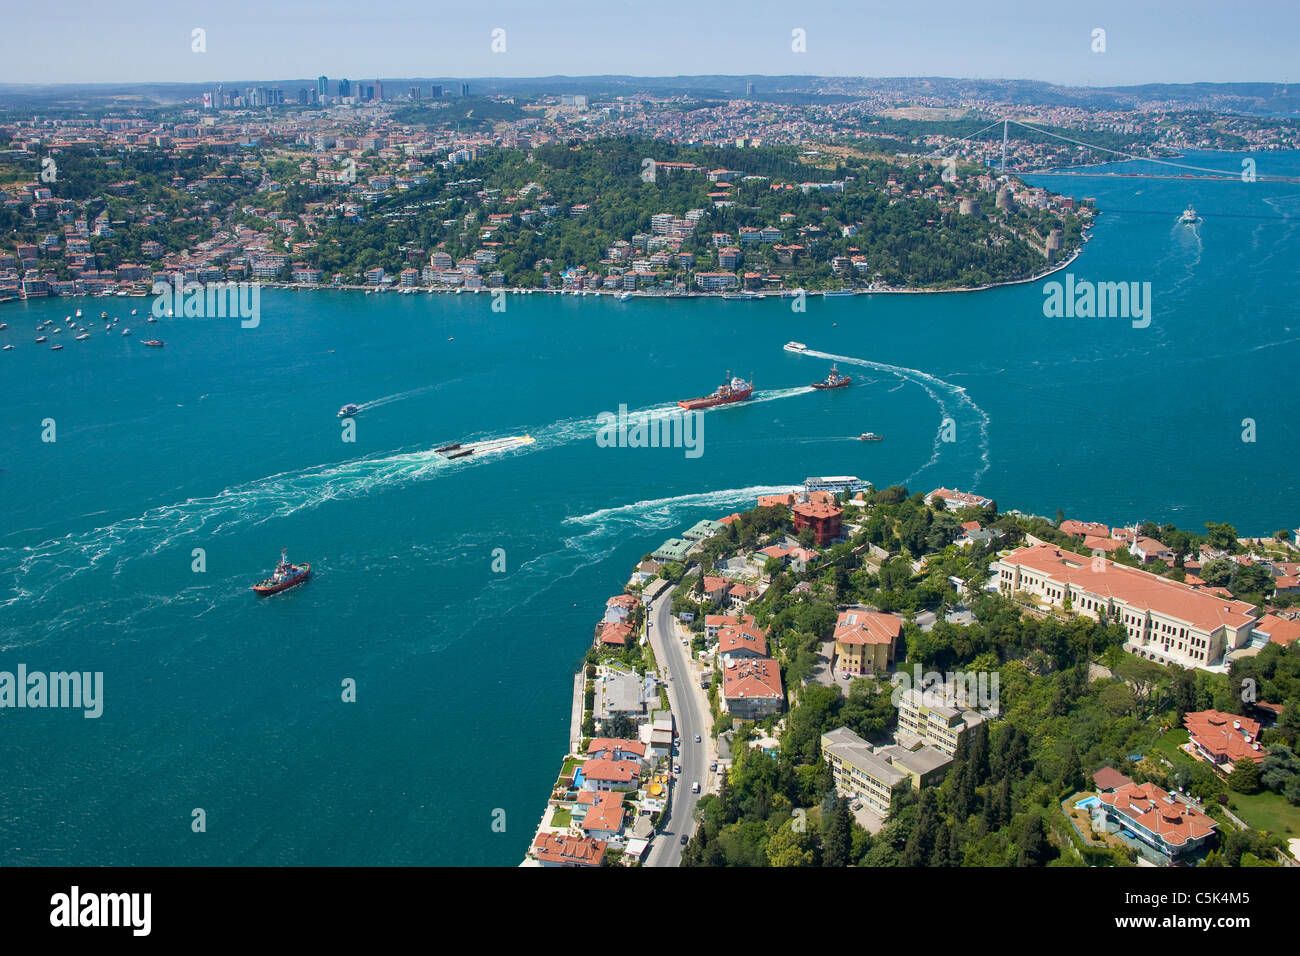 Boats towing a module of a natural gas platform through the Bosphorus, aerial, Istanbul - 2010 European Capital of Culture - Stock Photo